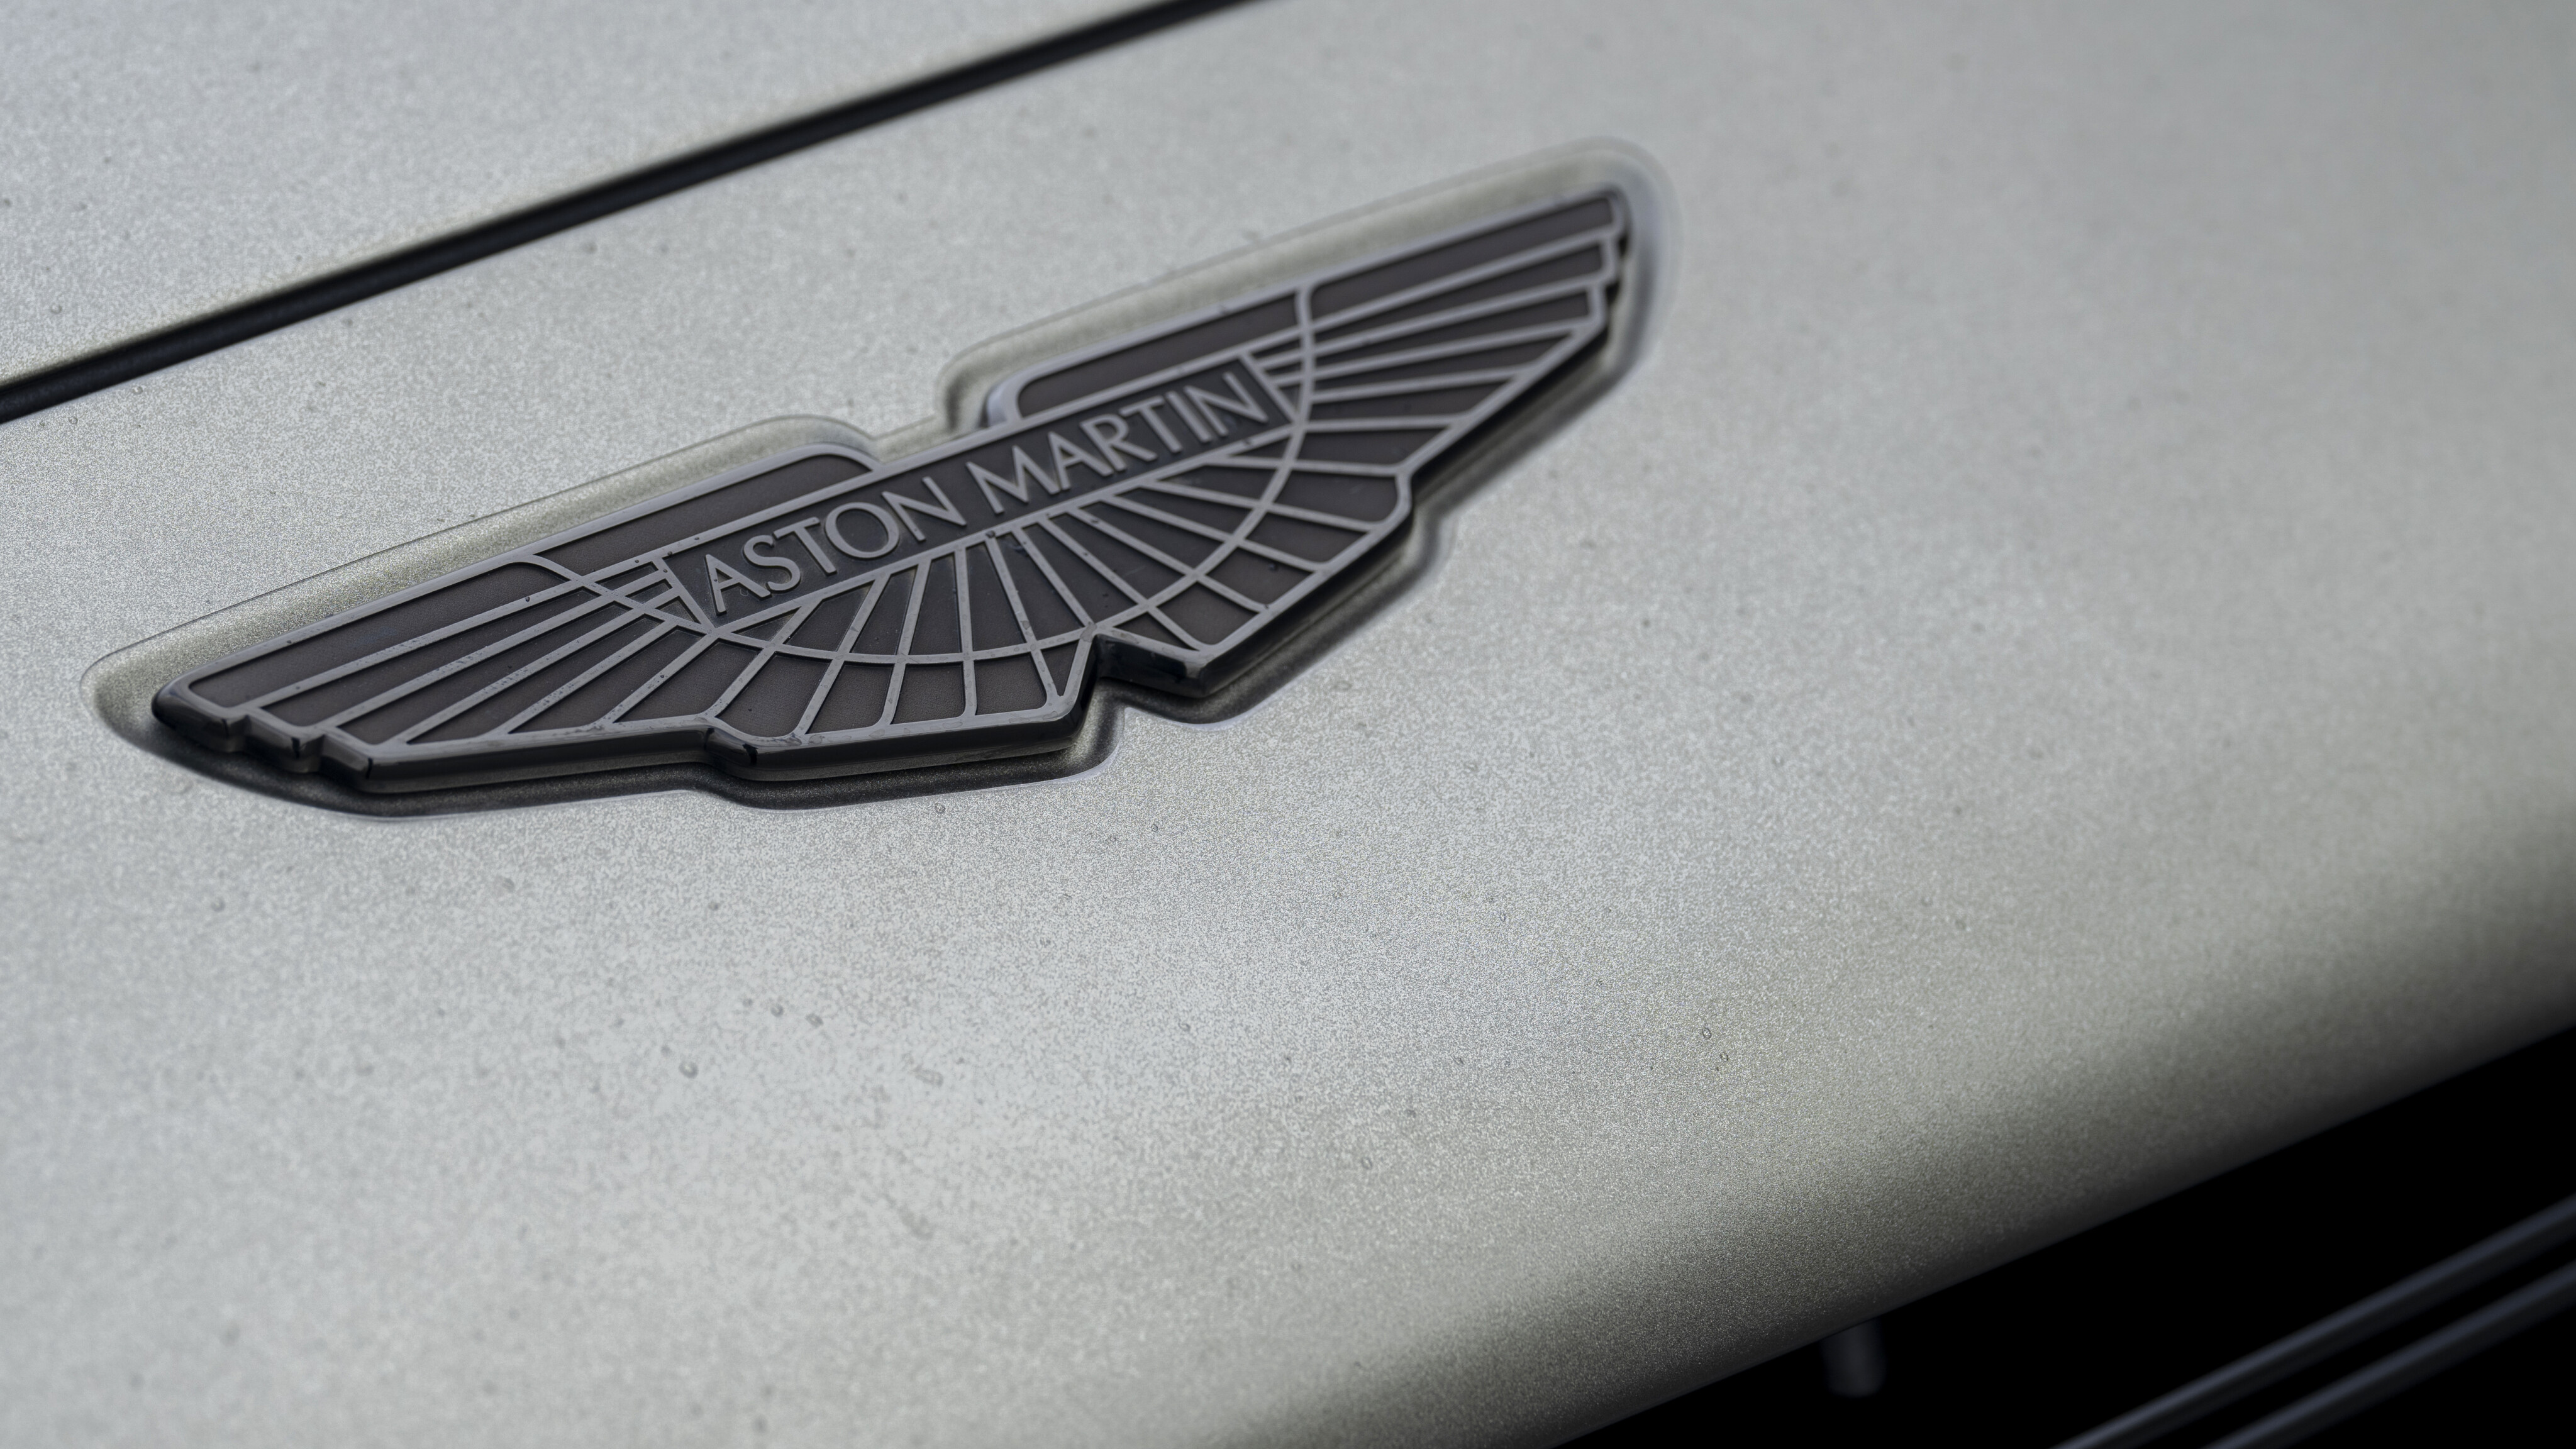 At least 50% of Aston Martin car sales should be electric by 2030, says CEO